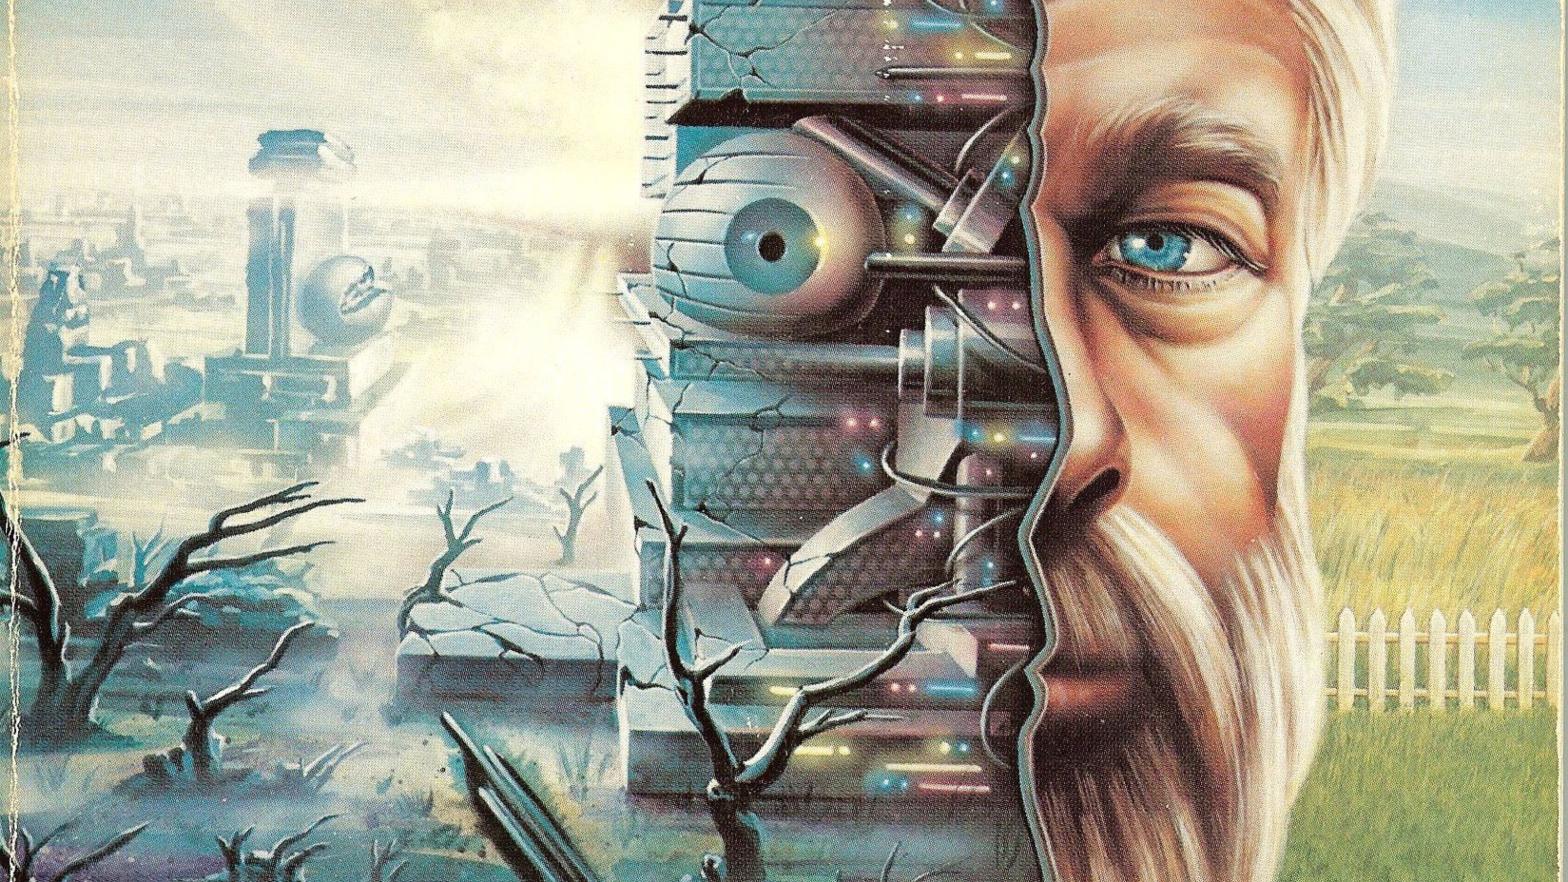 Inset of the cover to The Penultimate Truth. (Image: Philip K. Dick Estate)